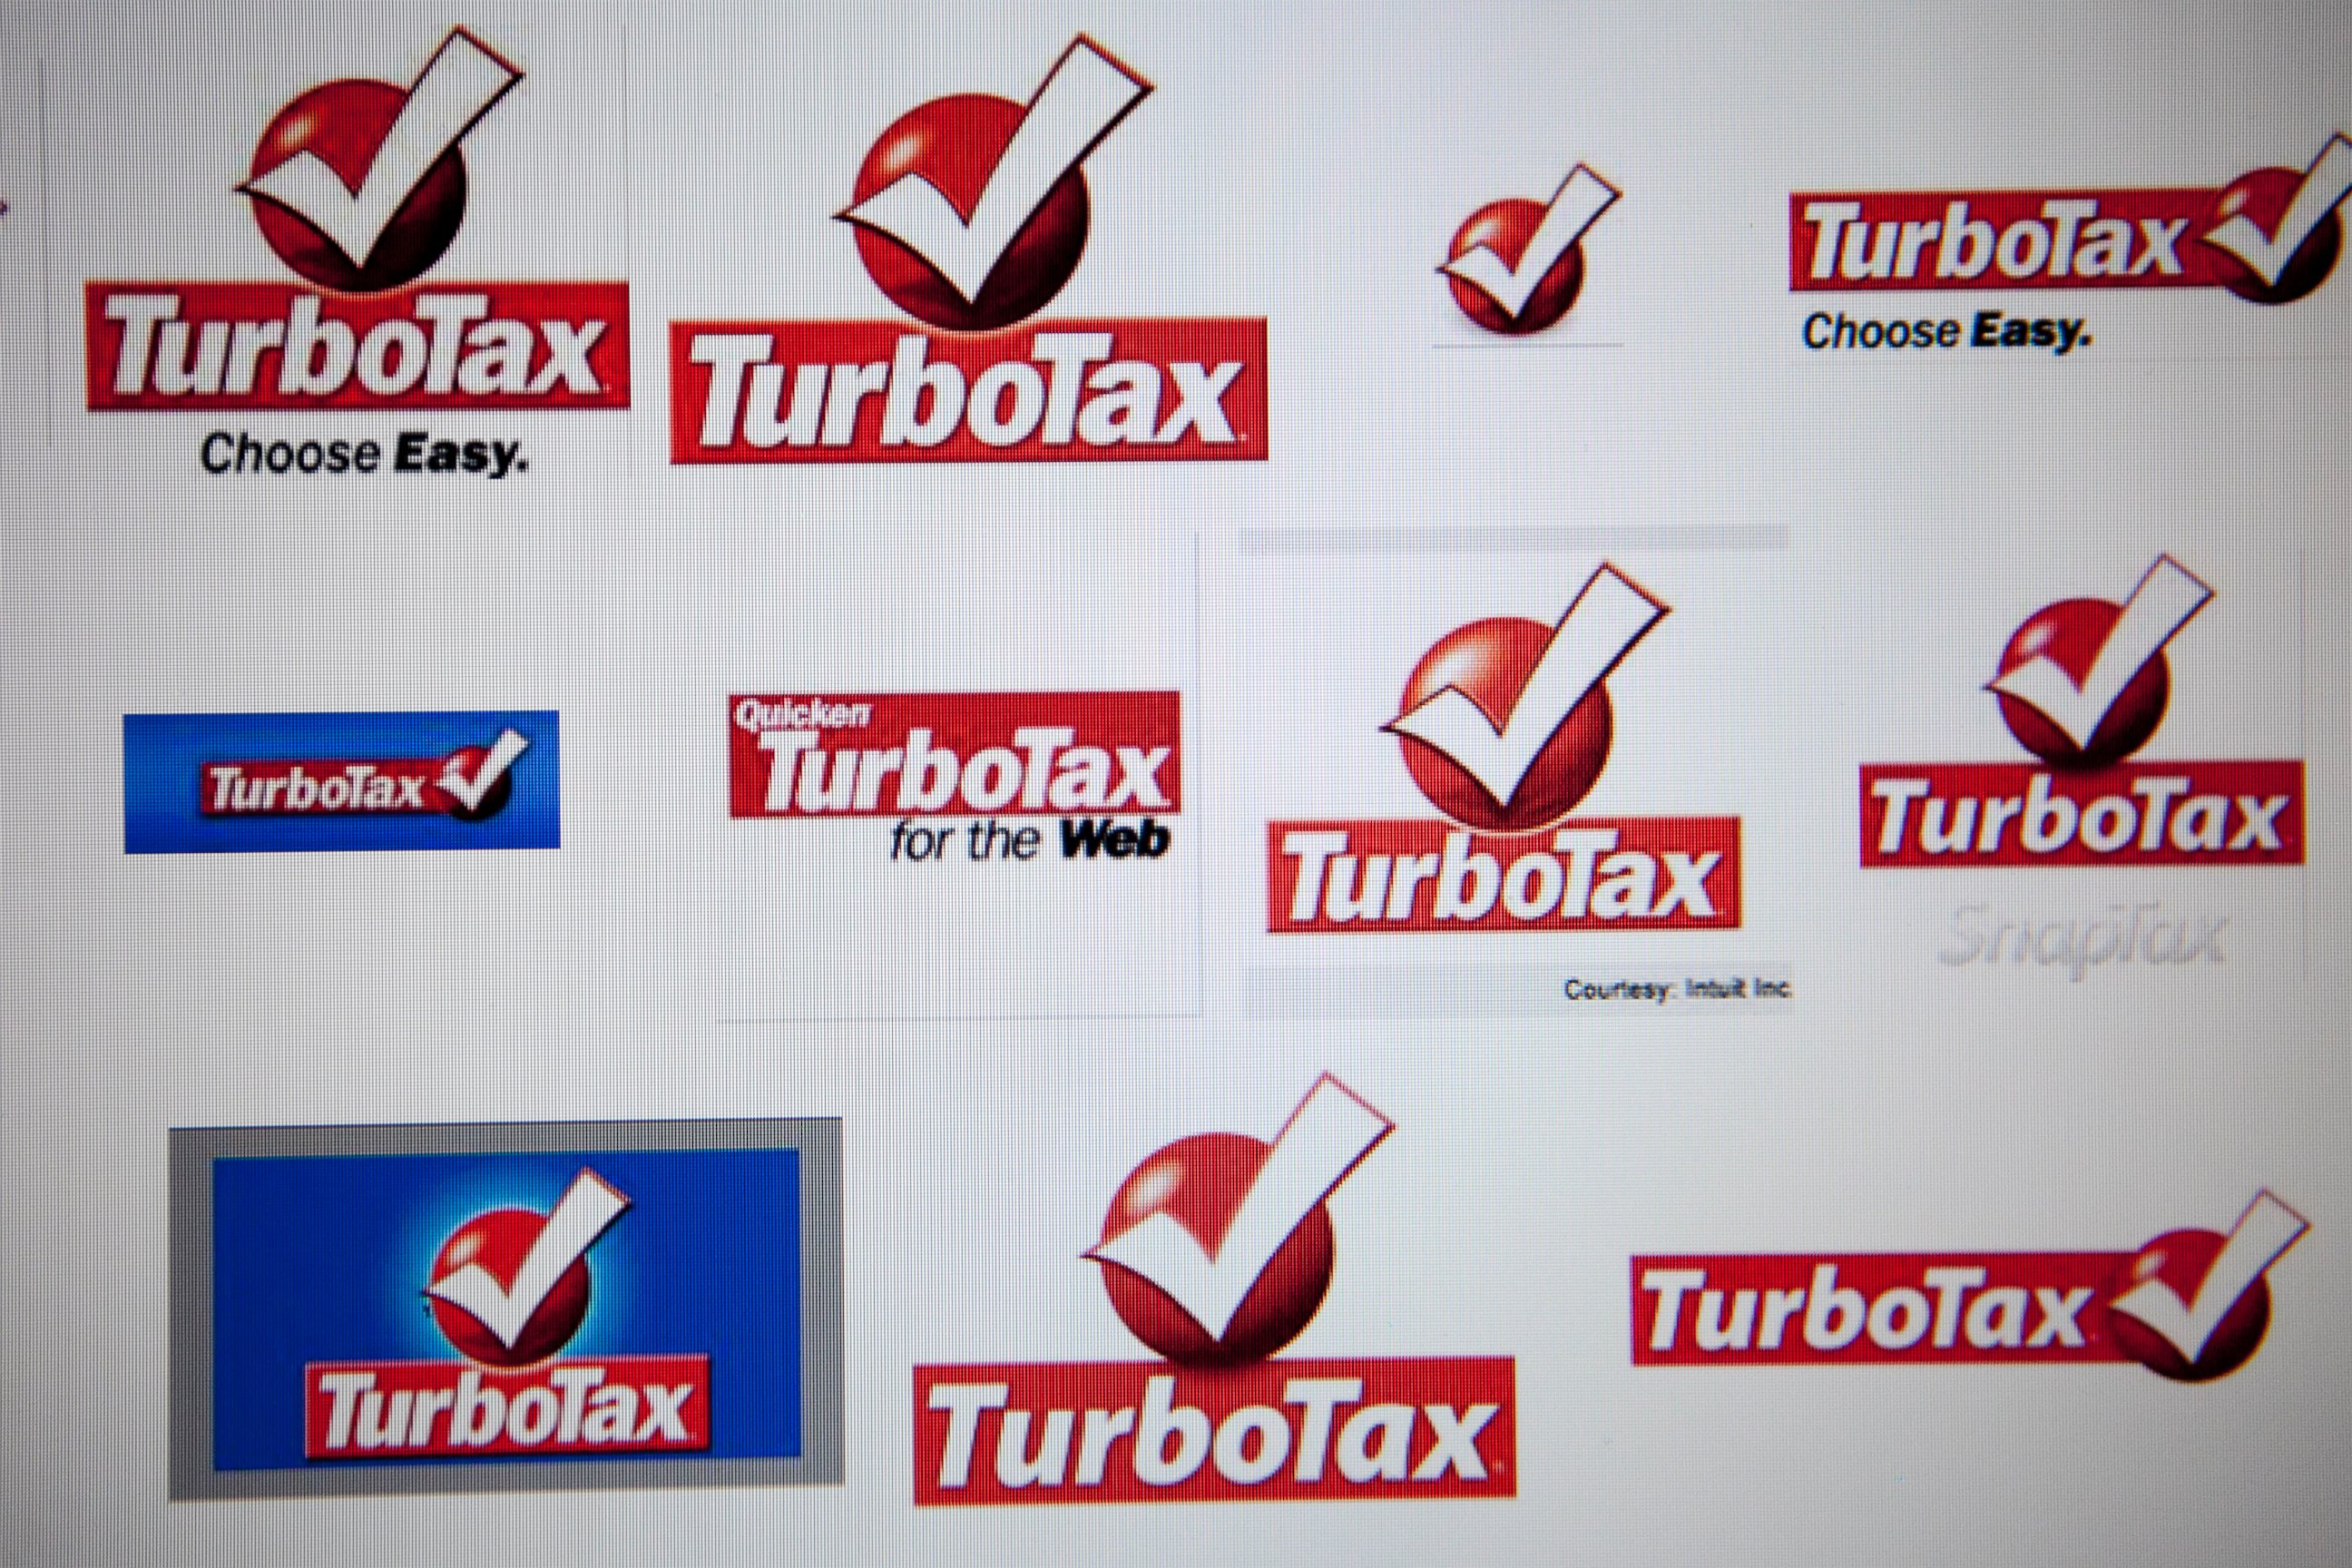 PHOTO: Intuit Inc.'s TurboTax logos are displayed on a computer monitor in Washington, D.C. on Feb. 13, 2012. 